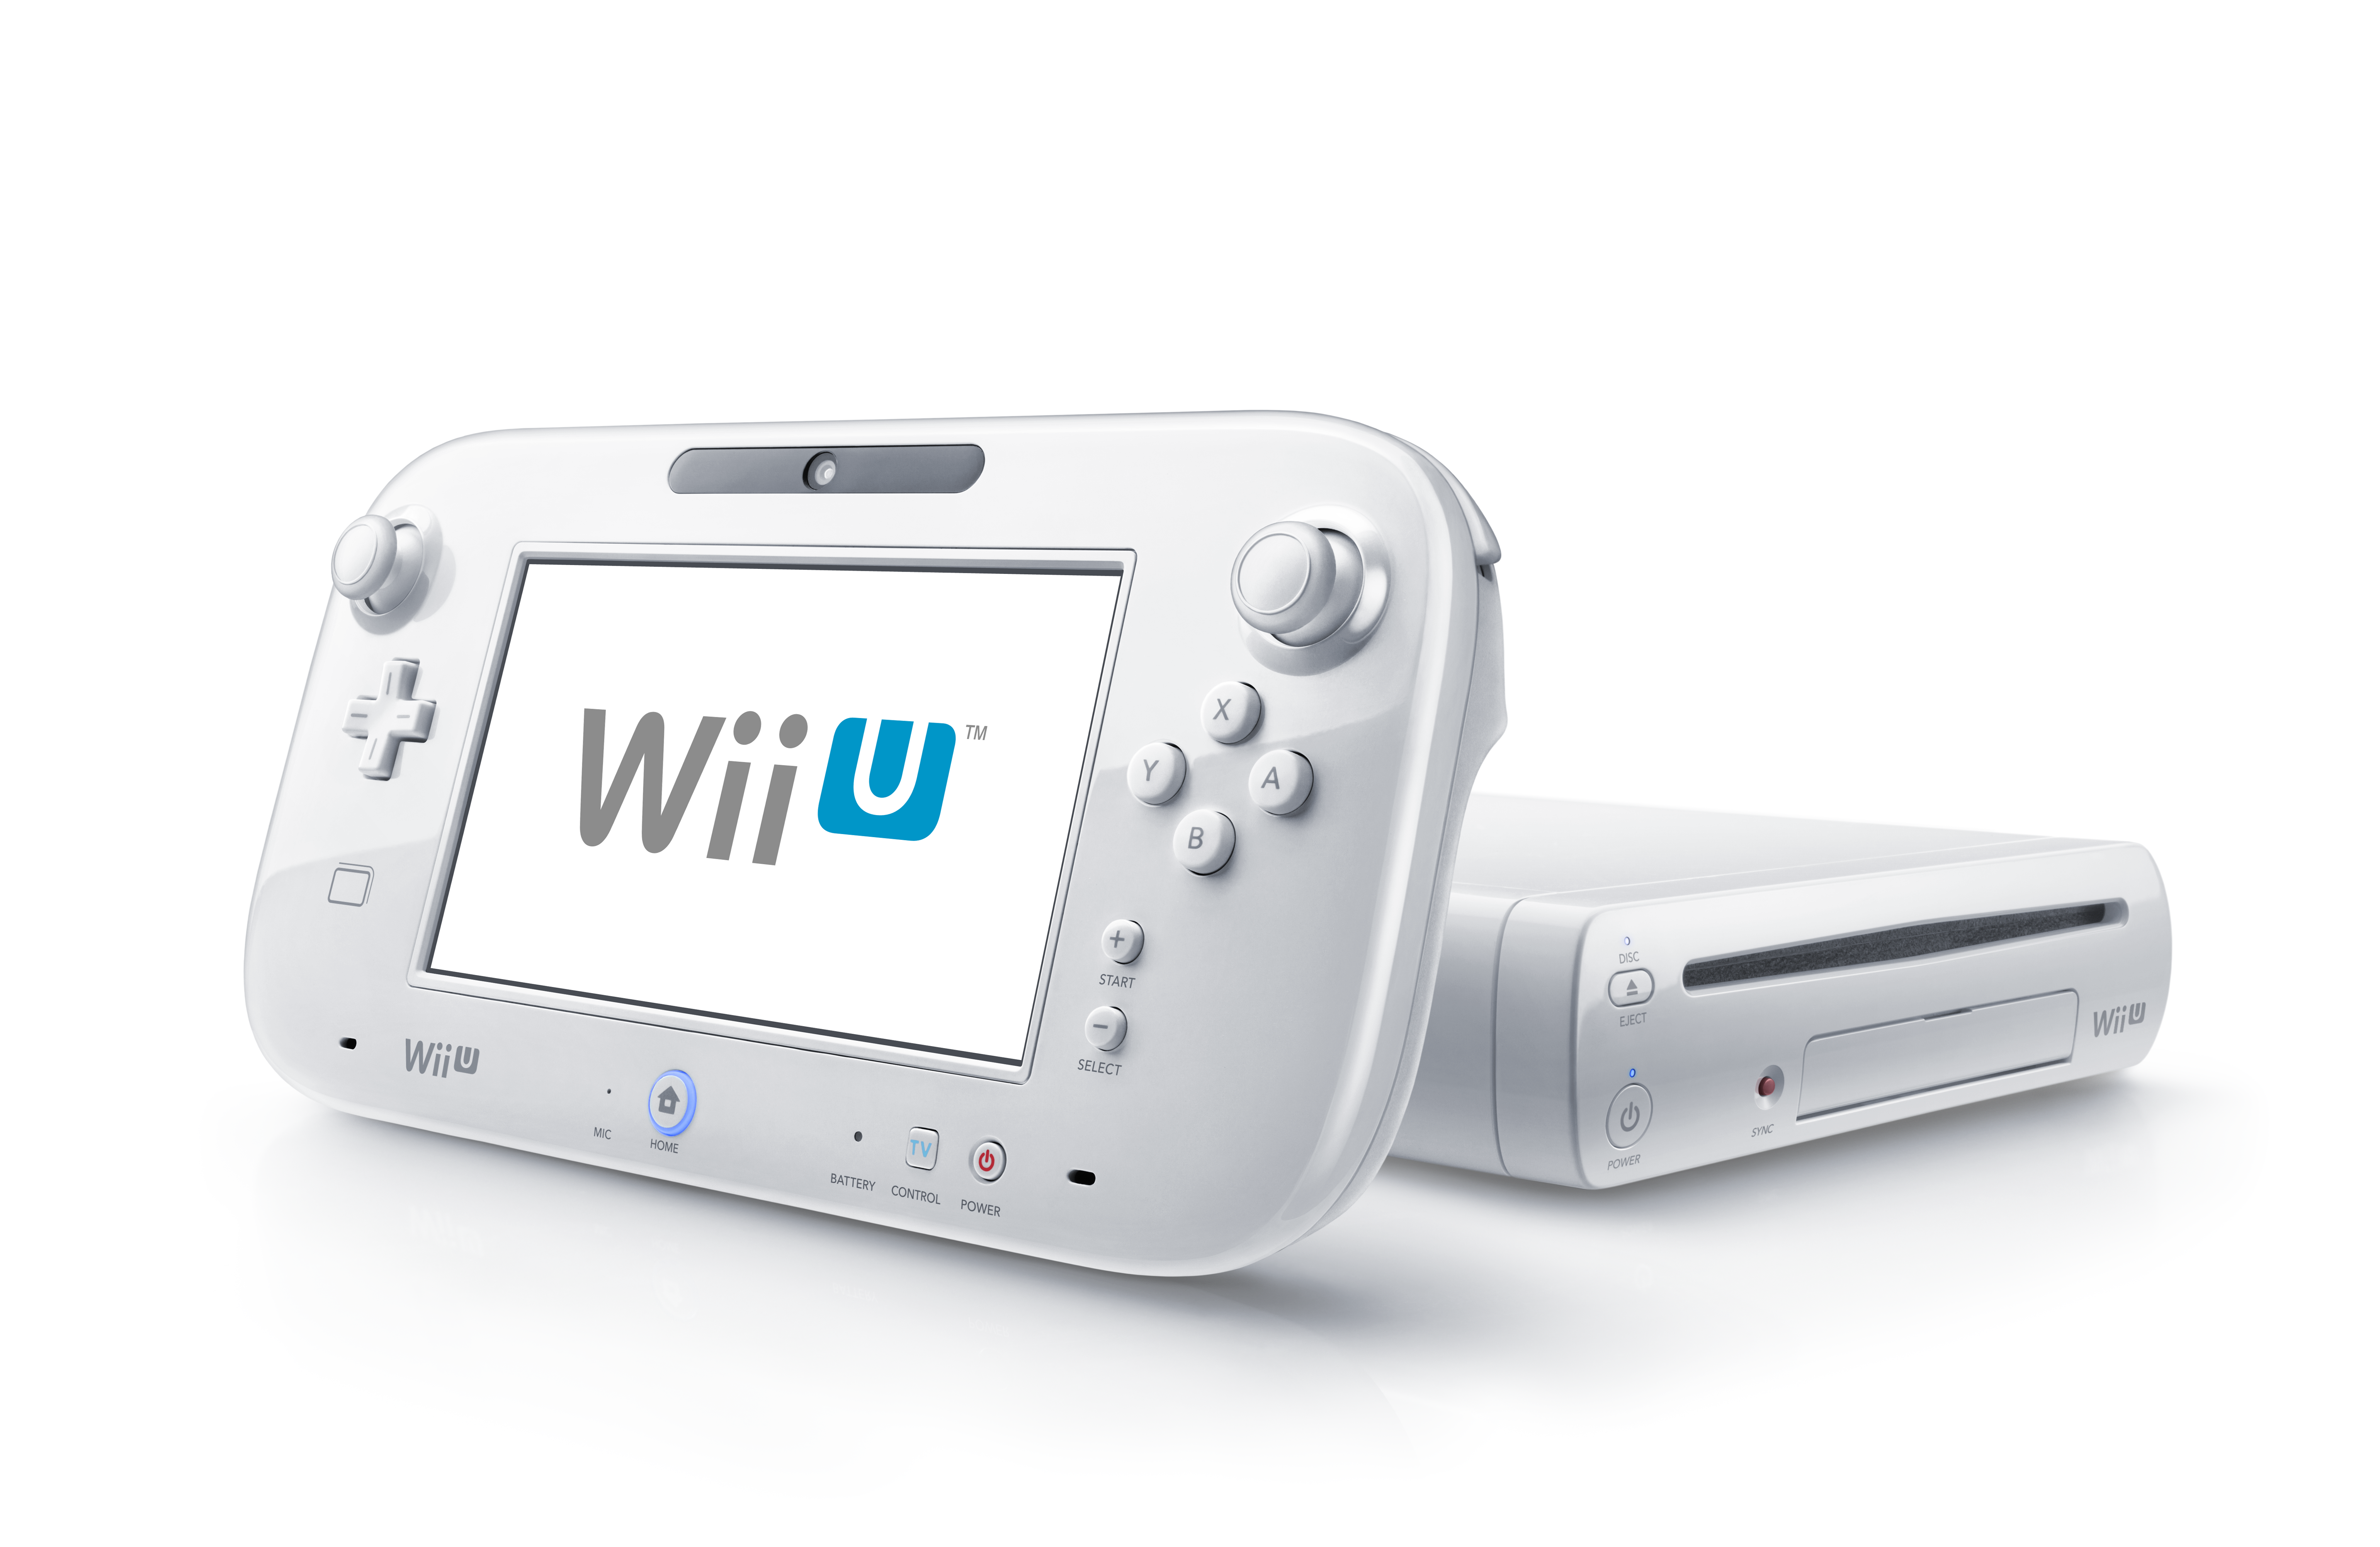 Wii U frame rate drops by half when using two Game Pads